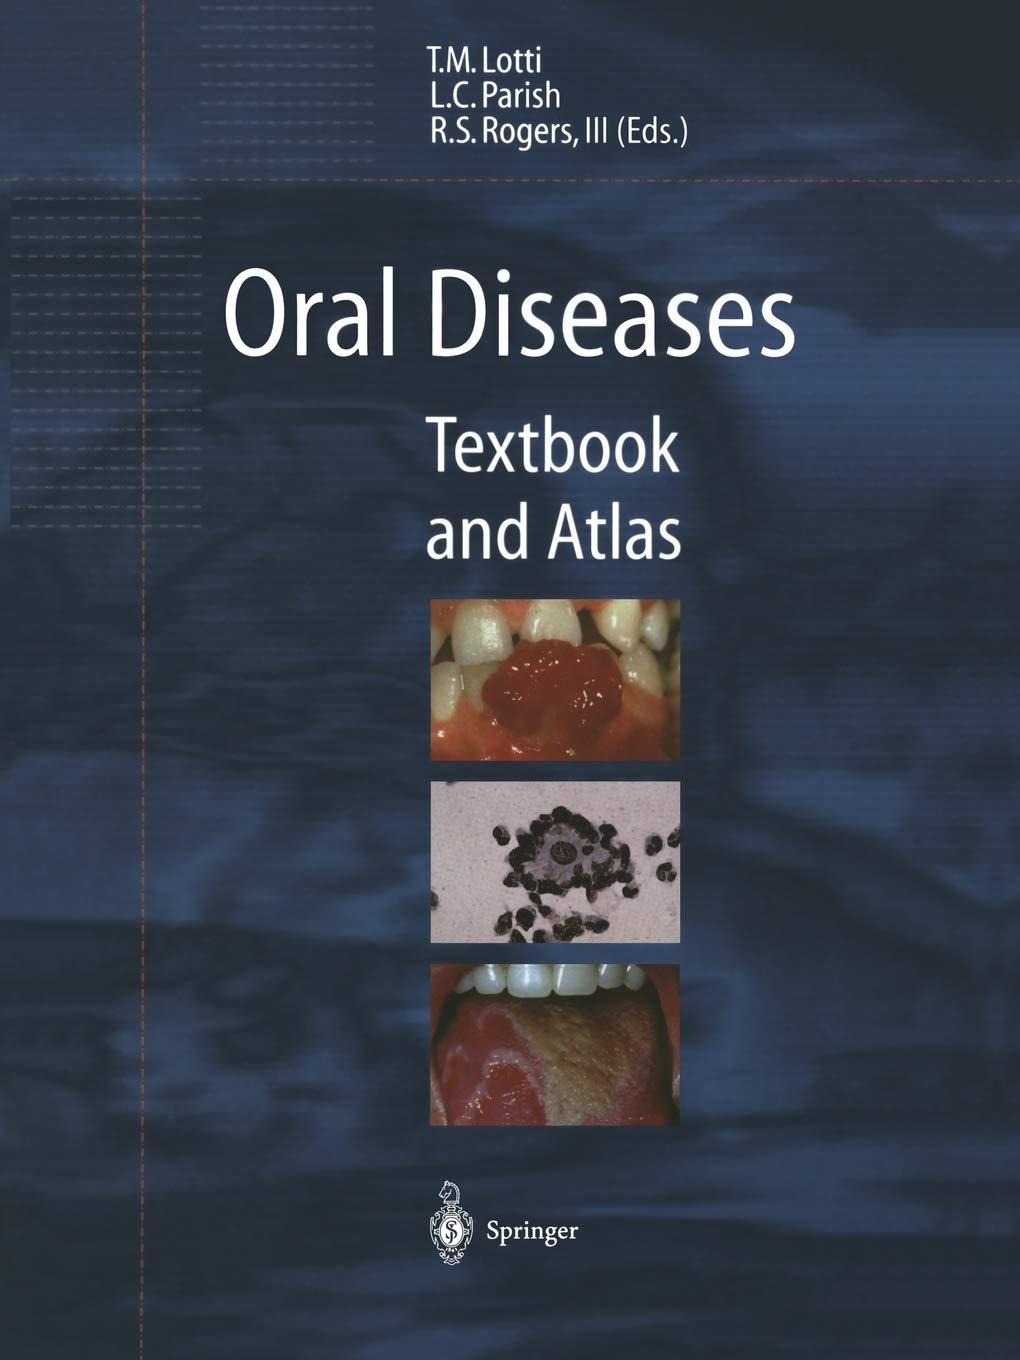 Oral Diseases: Textbook and Atlas